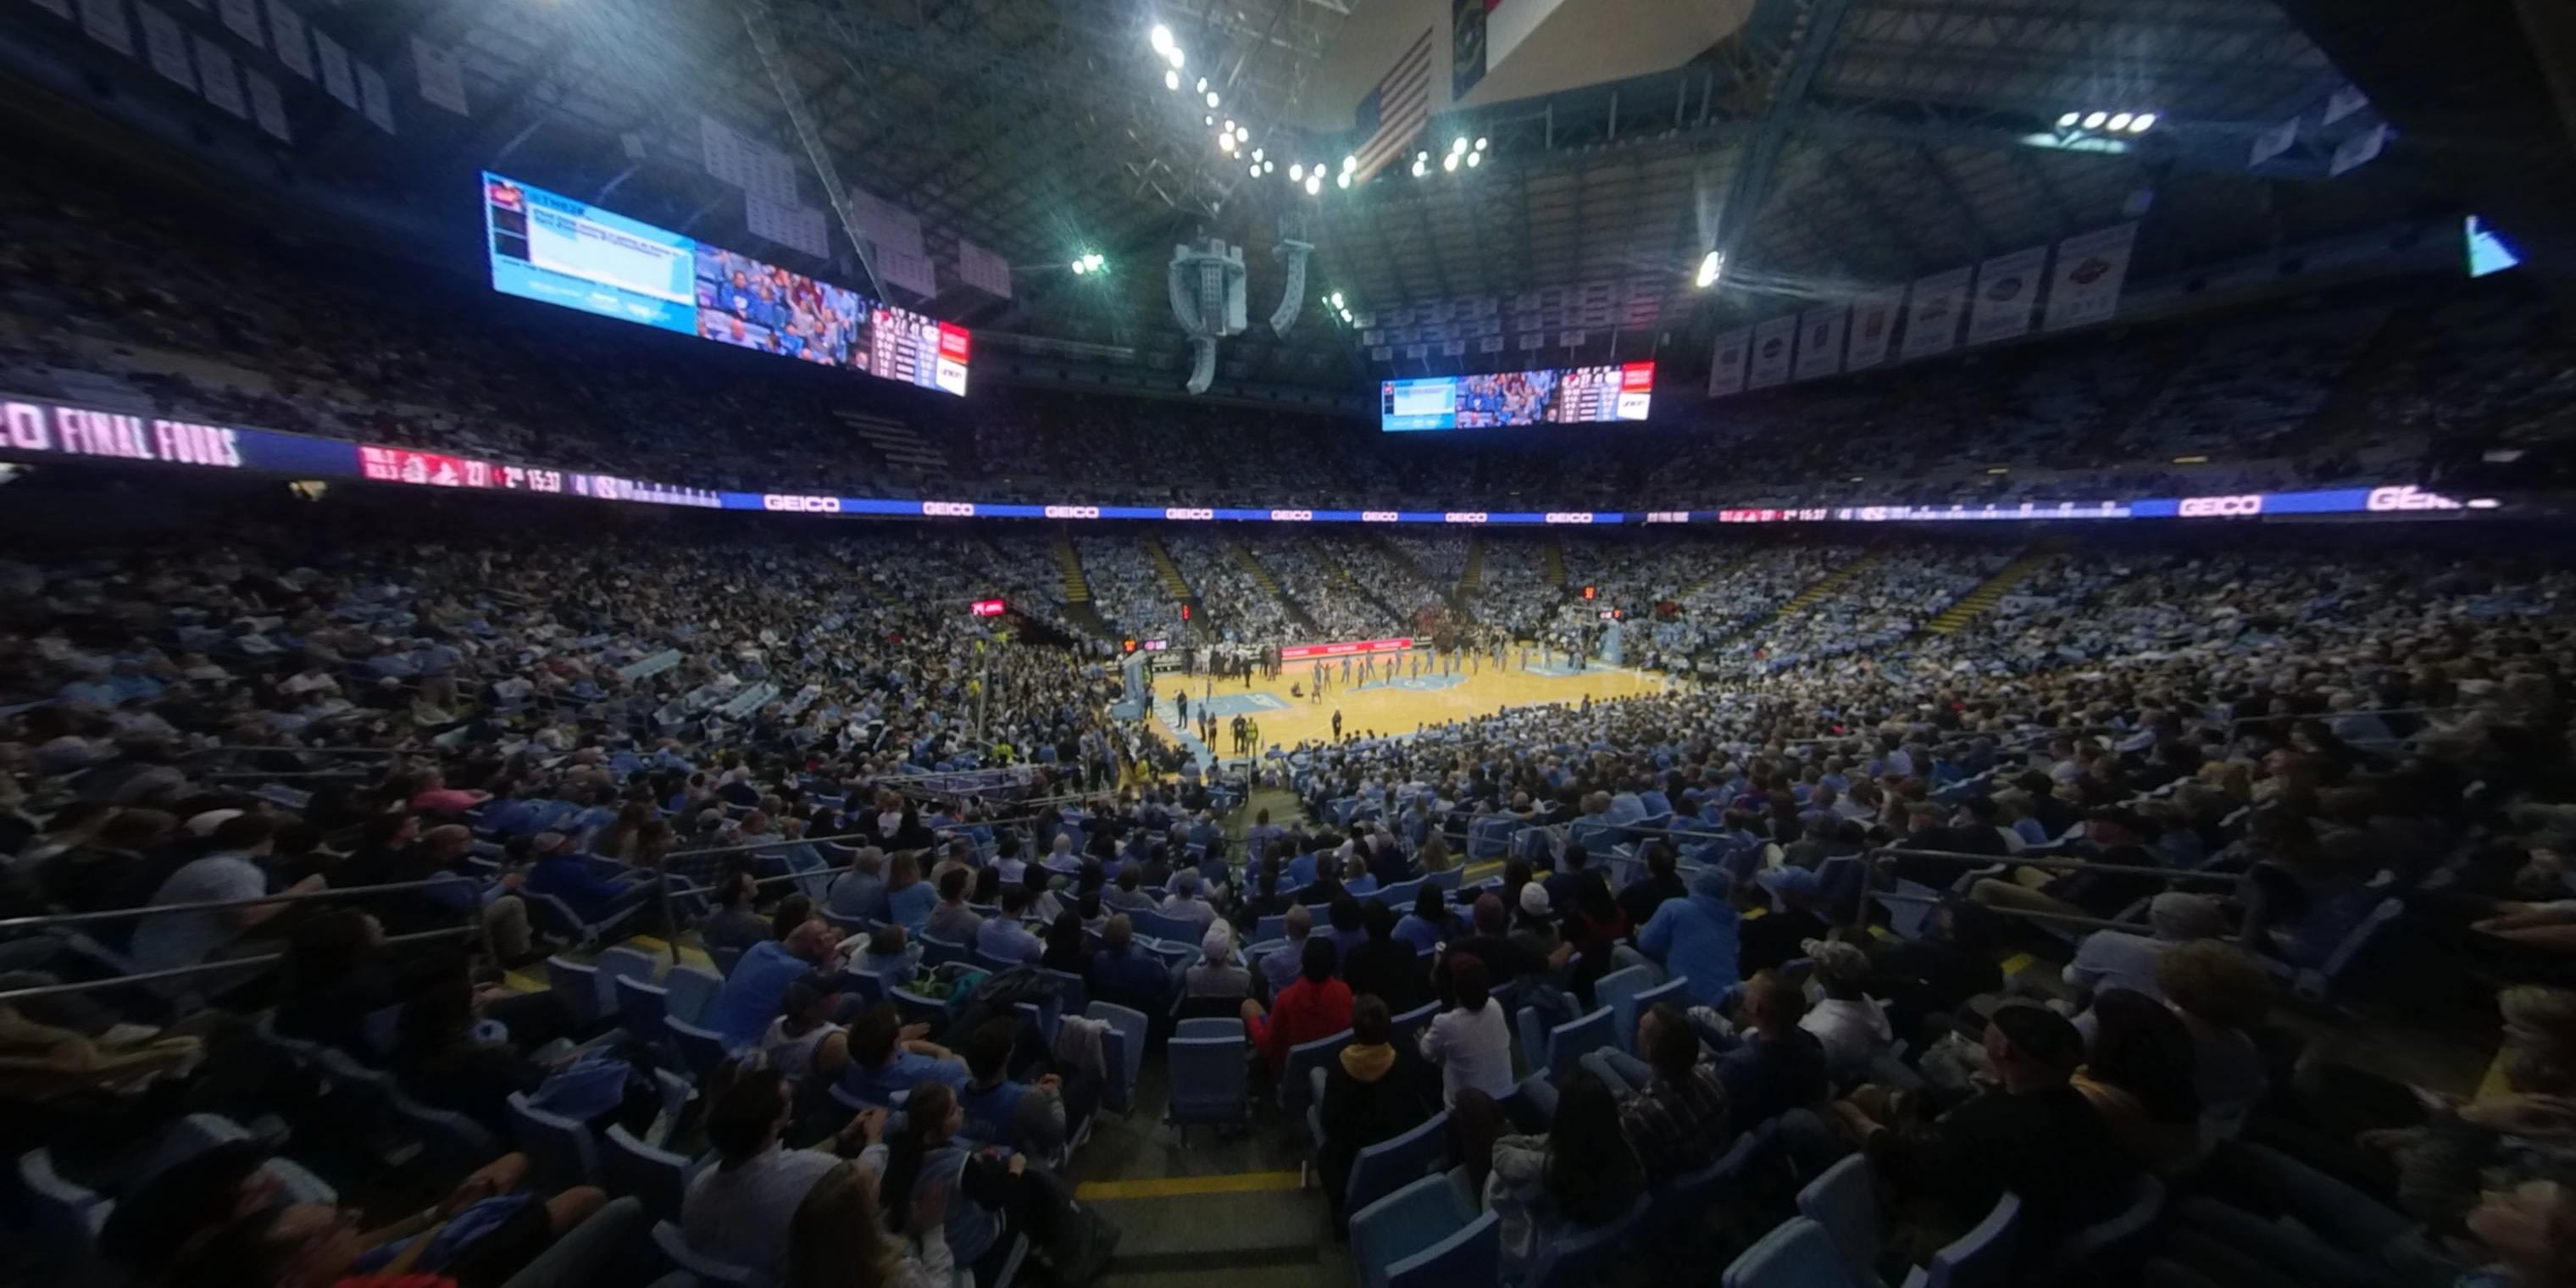 section 122 panoramic seat view  - dean smith center